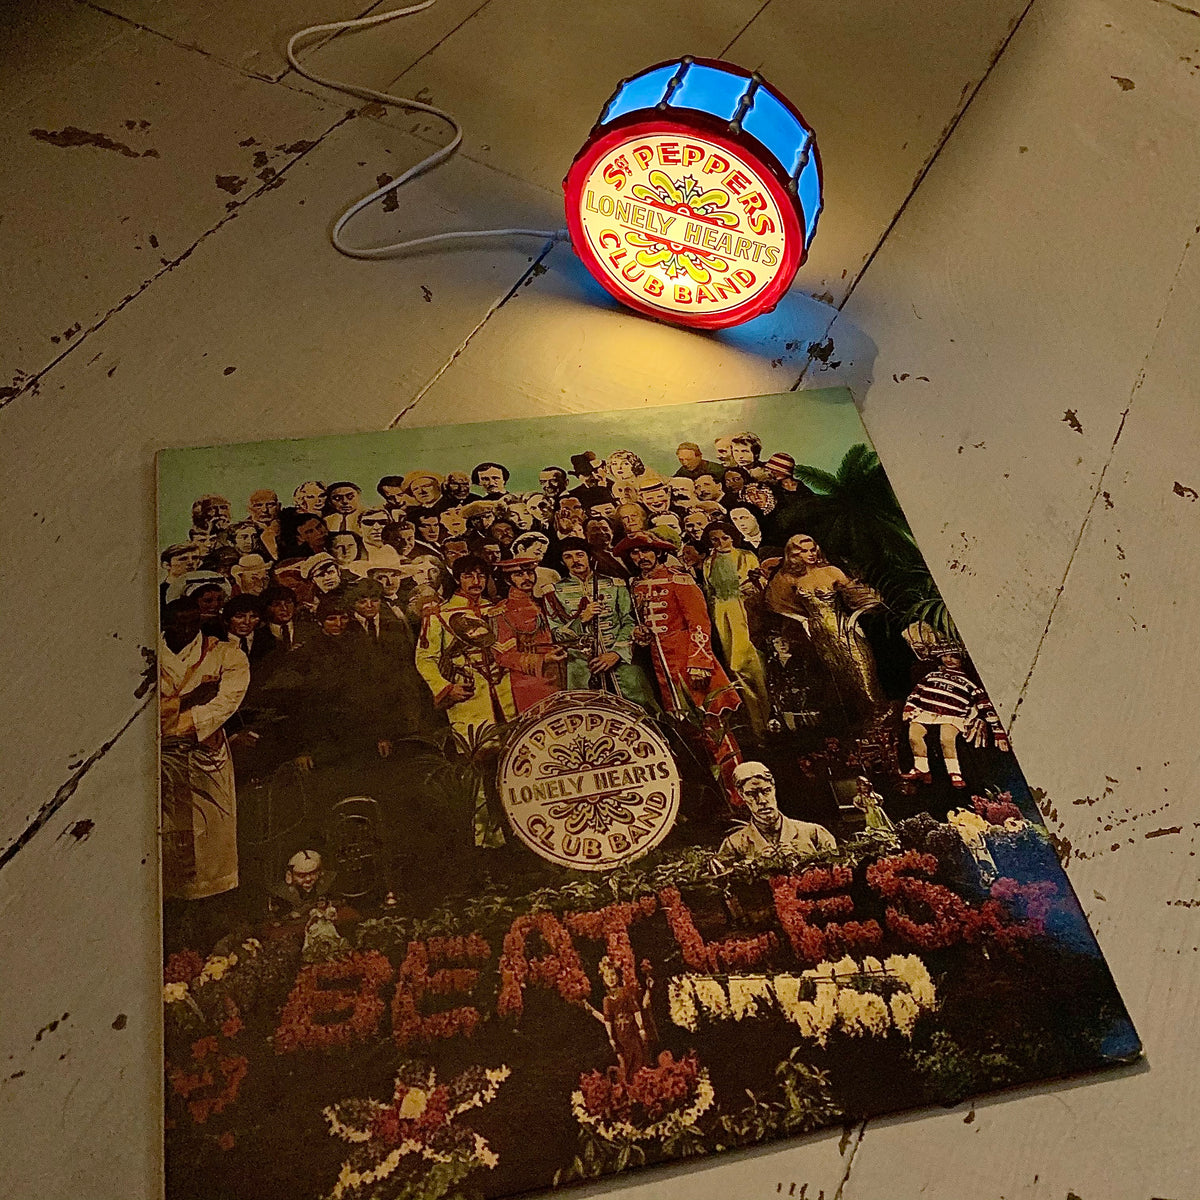 The Beatles Sgt Pepper's Lonely Hearts Club Band Drum Mini LED Light